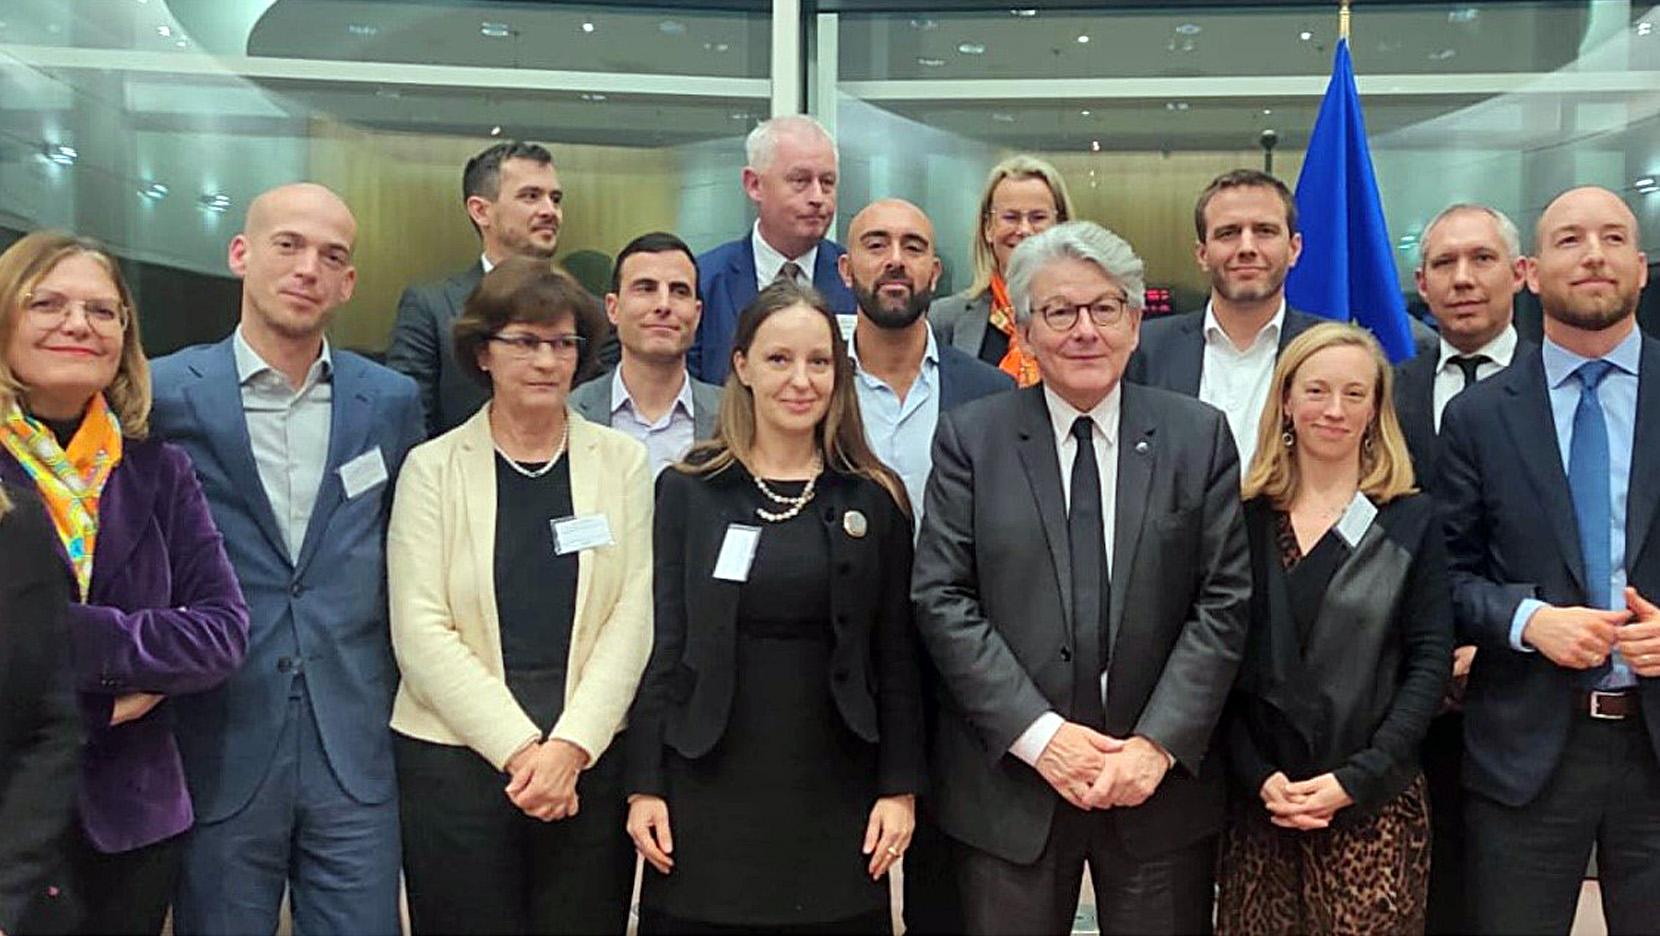 Route 35 kick-off meeting: EU initiative to green automotive industry